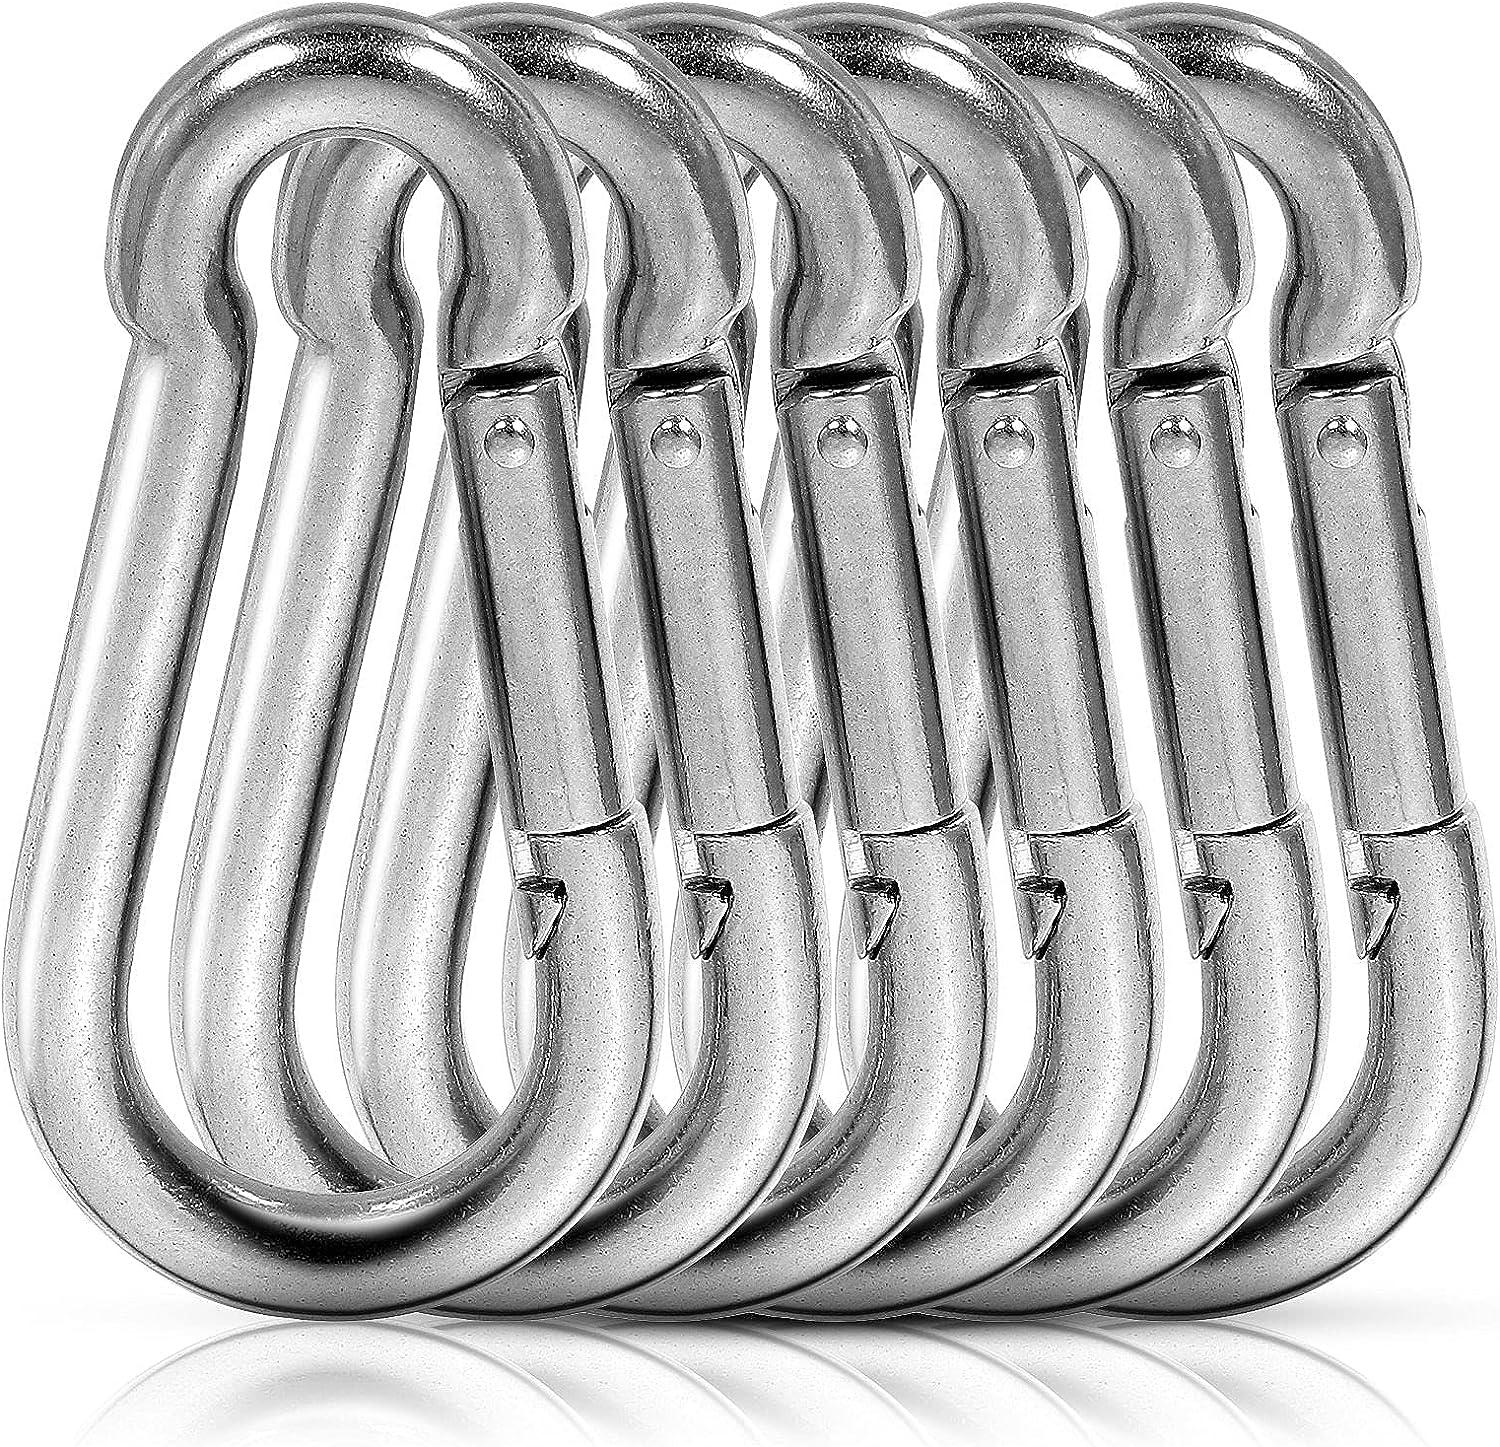 LANIAKEA 12Pcs 4inch Spring Snap Hook, M10 Stainless Steel Quick